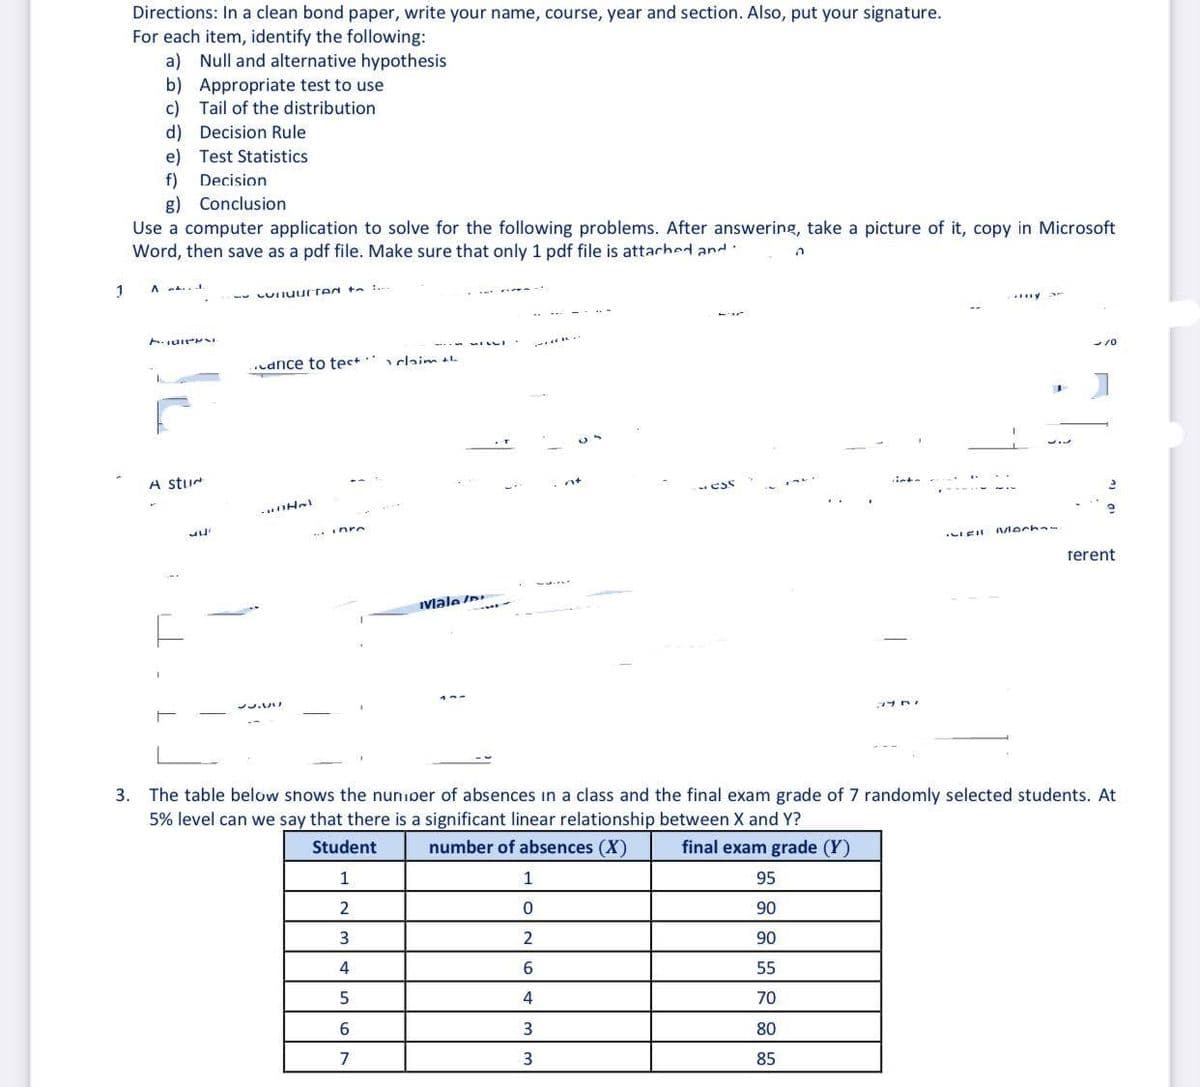 Directions: In a clean bond paper, write your name, course, year and section. Also, put your signature.
For each item, identify the following:
a) Null and alternative hypothesis
b) Appropriate test to use
c) Tail of the distribution
d) Decision Rule
e) Test Statistics
f)
g) Conclusion
Decision
Use a computer application to solve for the following problems. After answering, take a picture of it, copy in Microsoft
Word, then save as a pdf file. Make sure that only 1 pdf file is attached and:
A a..
-- LUIIuurted ta .
udnce to tes+ claim
A stur
ess
- Hel
..Inre
Mecha
rerent
Ivlale In
プリ A
3. The table below shows the nunioer of absences in a class and the final exam grade of 7 randomly selected students. At
5% level can we say that there is a significant linear relationship between X and Y?
Student
number of absences (X)
final exam grade (Y)
1
1
95
90
3
2
90
4
55
4
70
80
7
3
85
